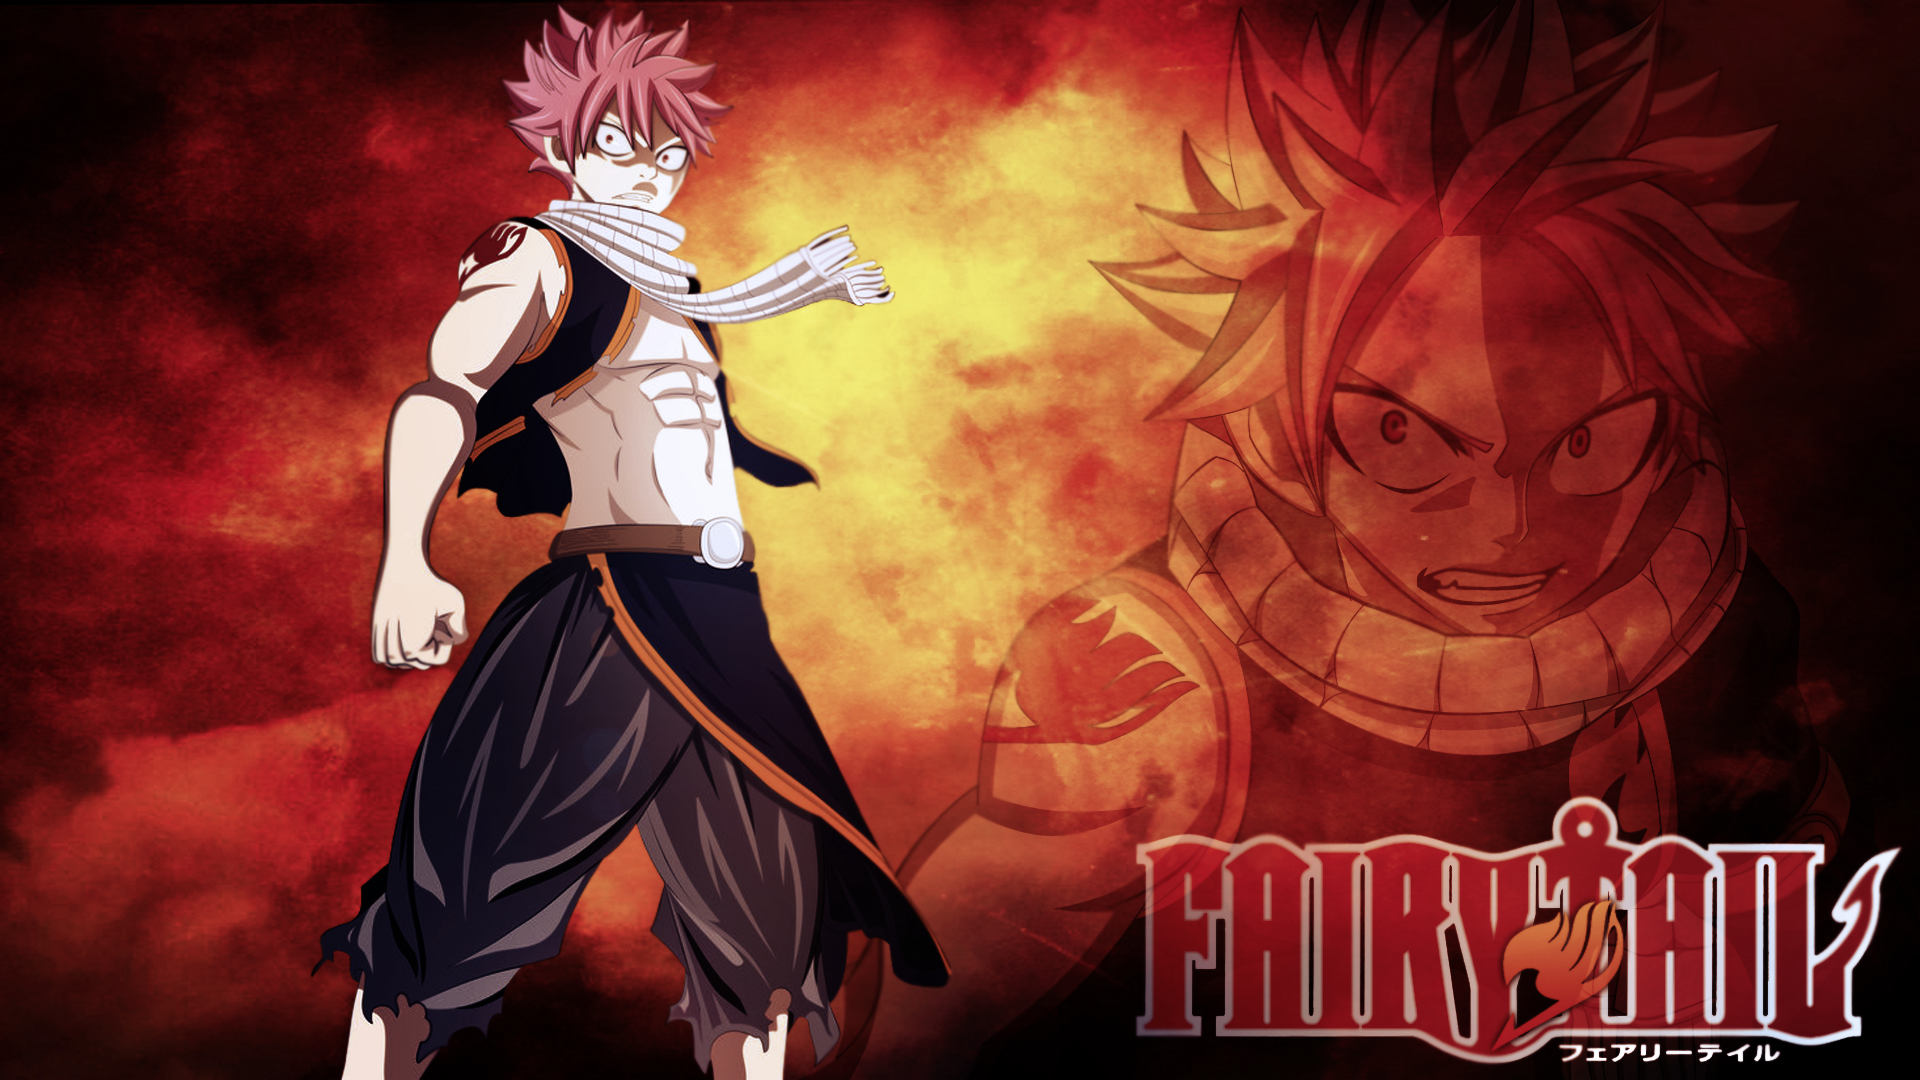 Free Download Fotos Fairy Tail Wallpaper 19x1080 For Your Desktop Mobile Tablet Explore 77 Fairy Tail Wallpaper Hd Fairy Tail Wallpaper Fairy Tail Logo Wallpaper Fairy Background Wallpaper